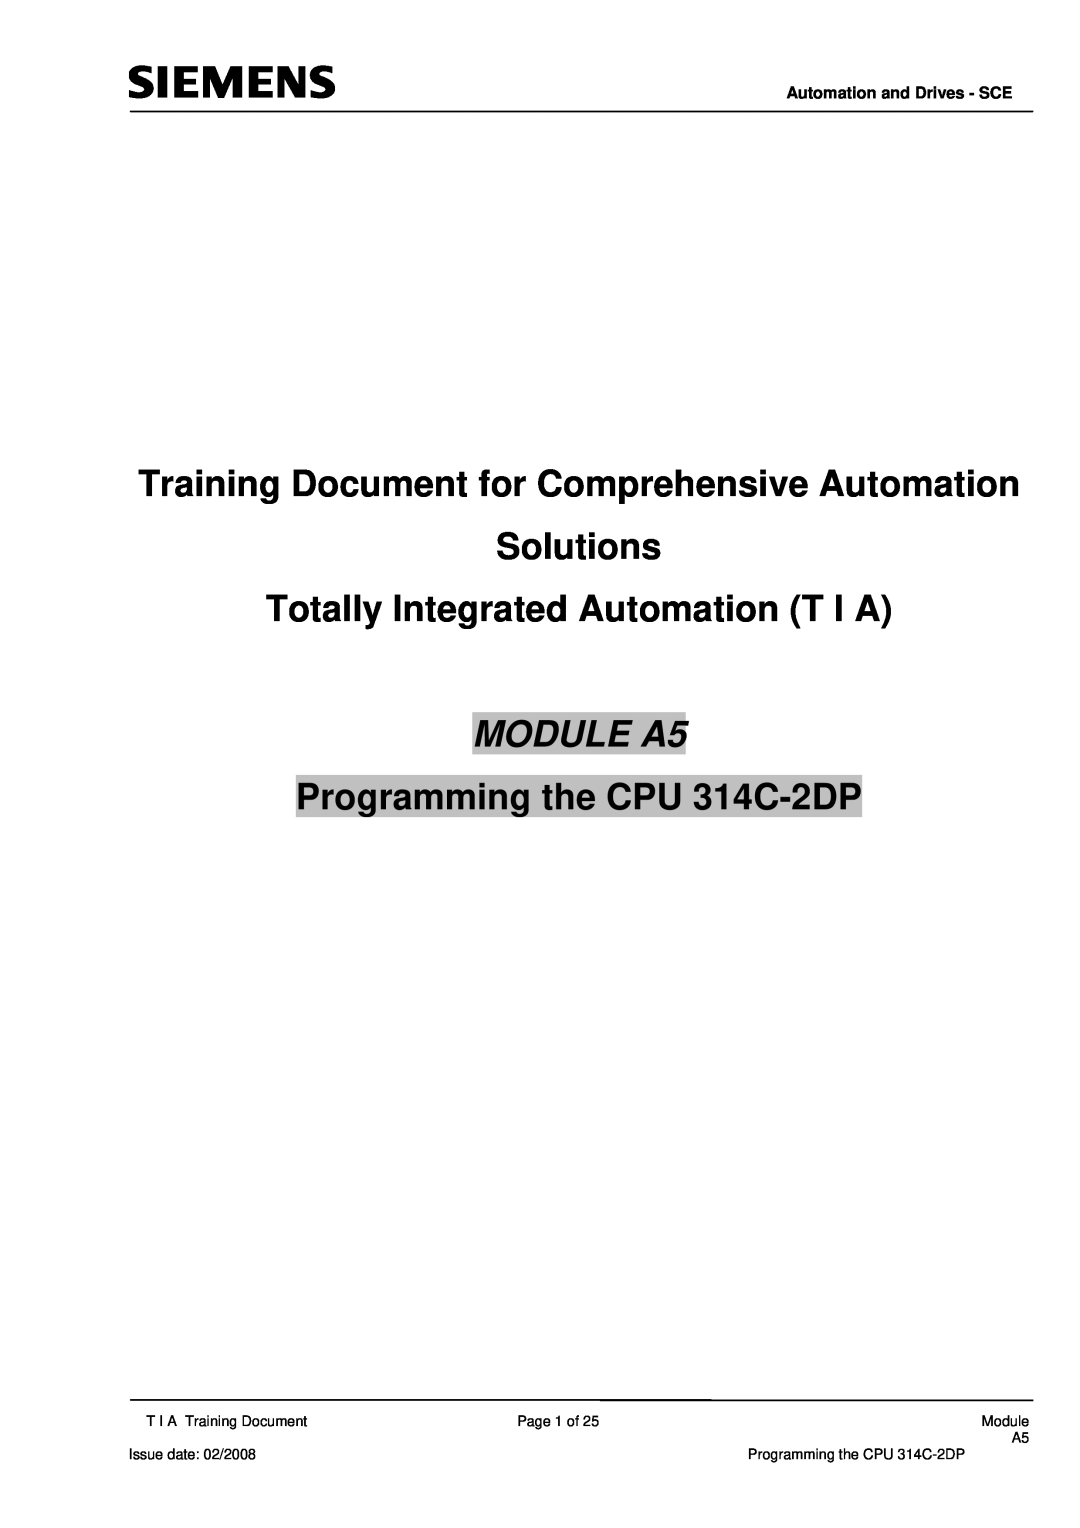 Siemens programming the cpu 314c-2dp manual Training Document for Comprehensive Automation Solutions, MODULE A5, Page 1 of 